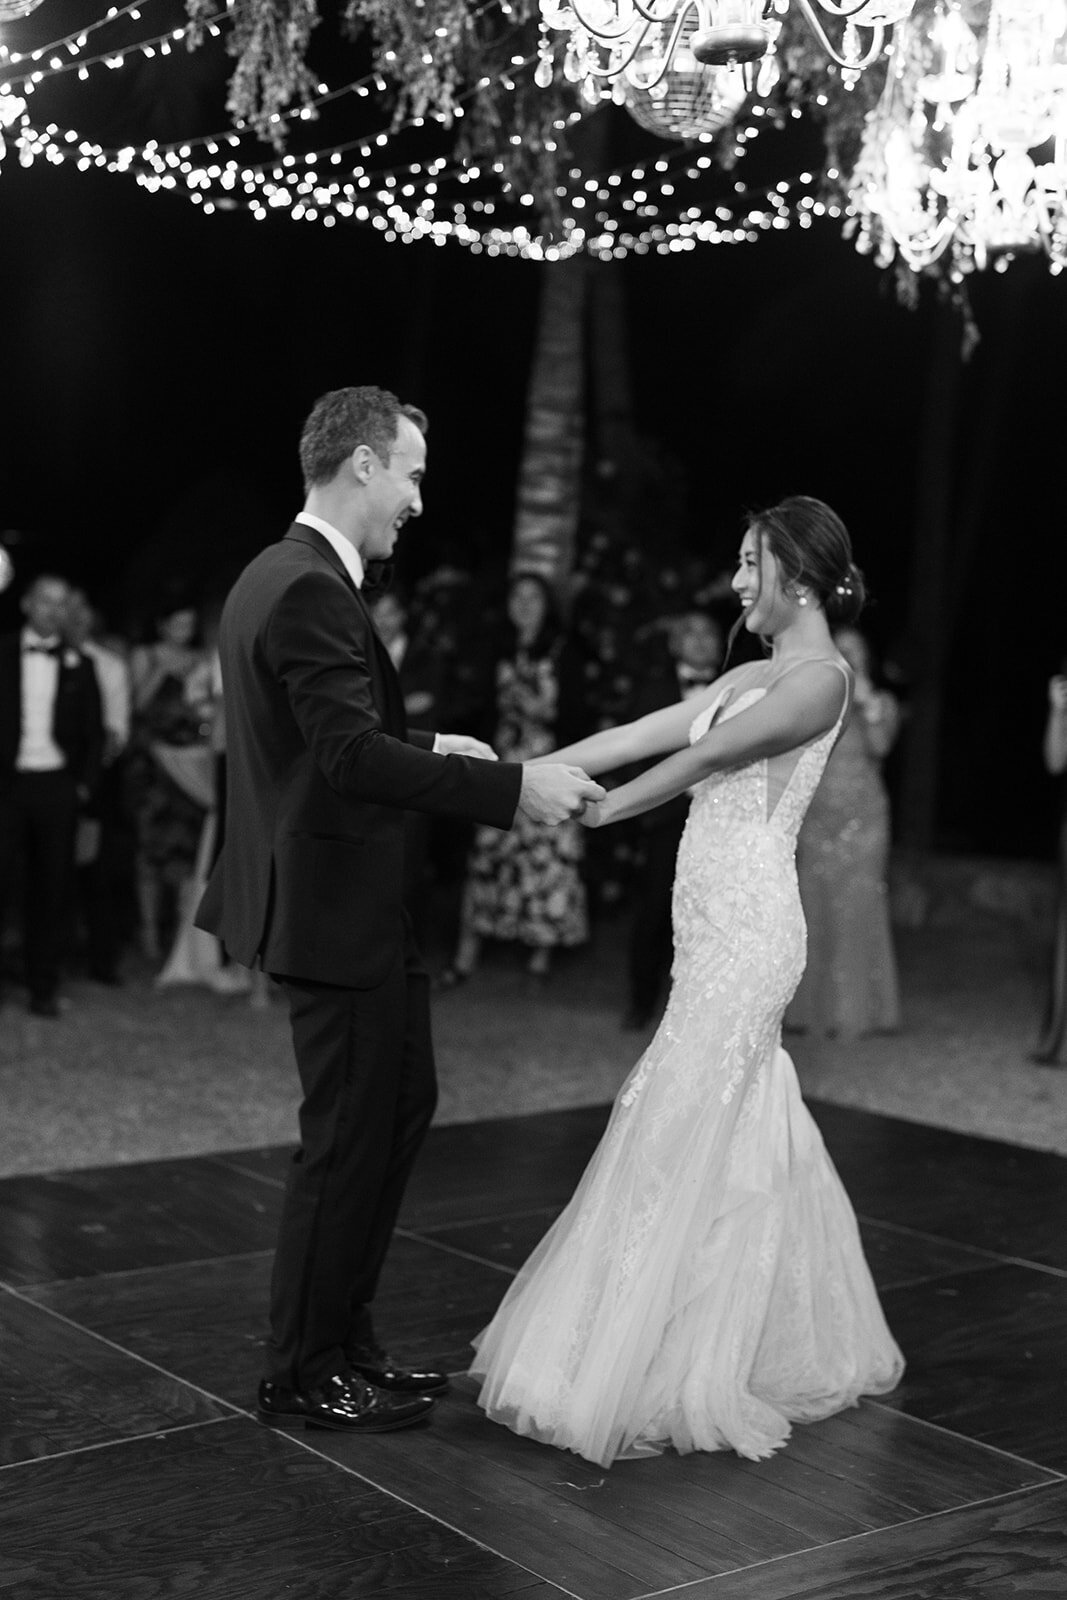 First Dance at One and Only Mandarina wedding